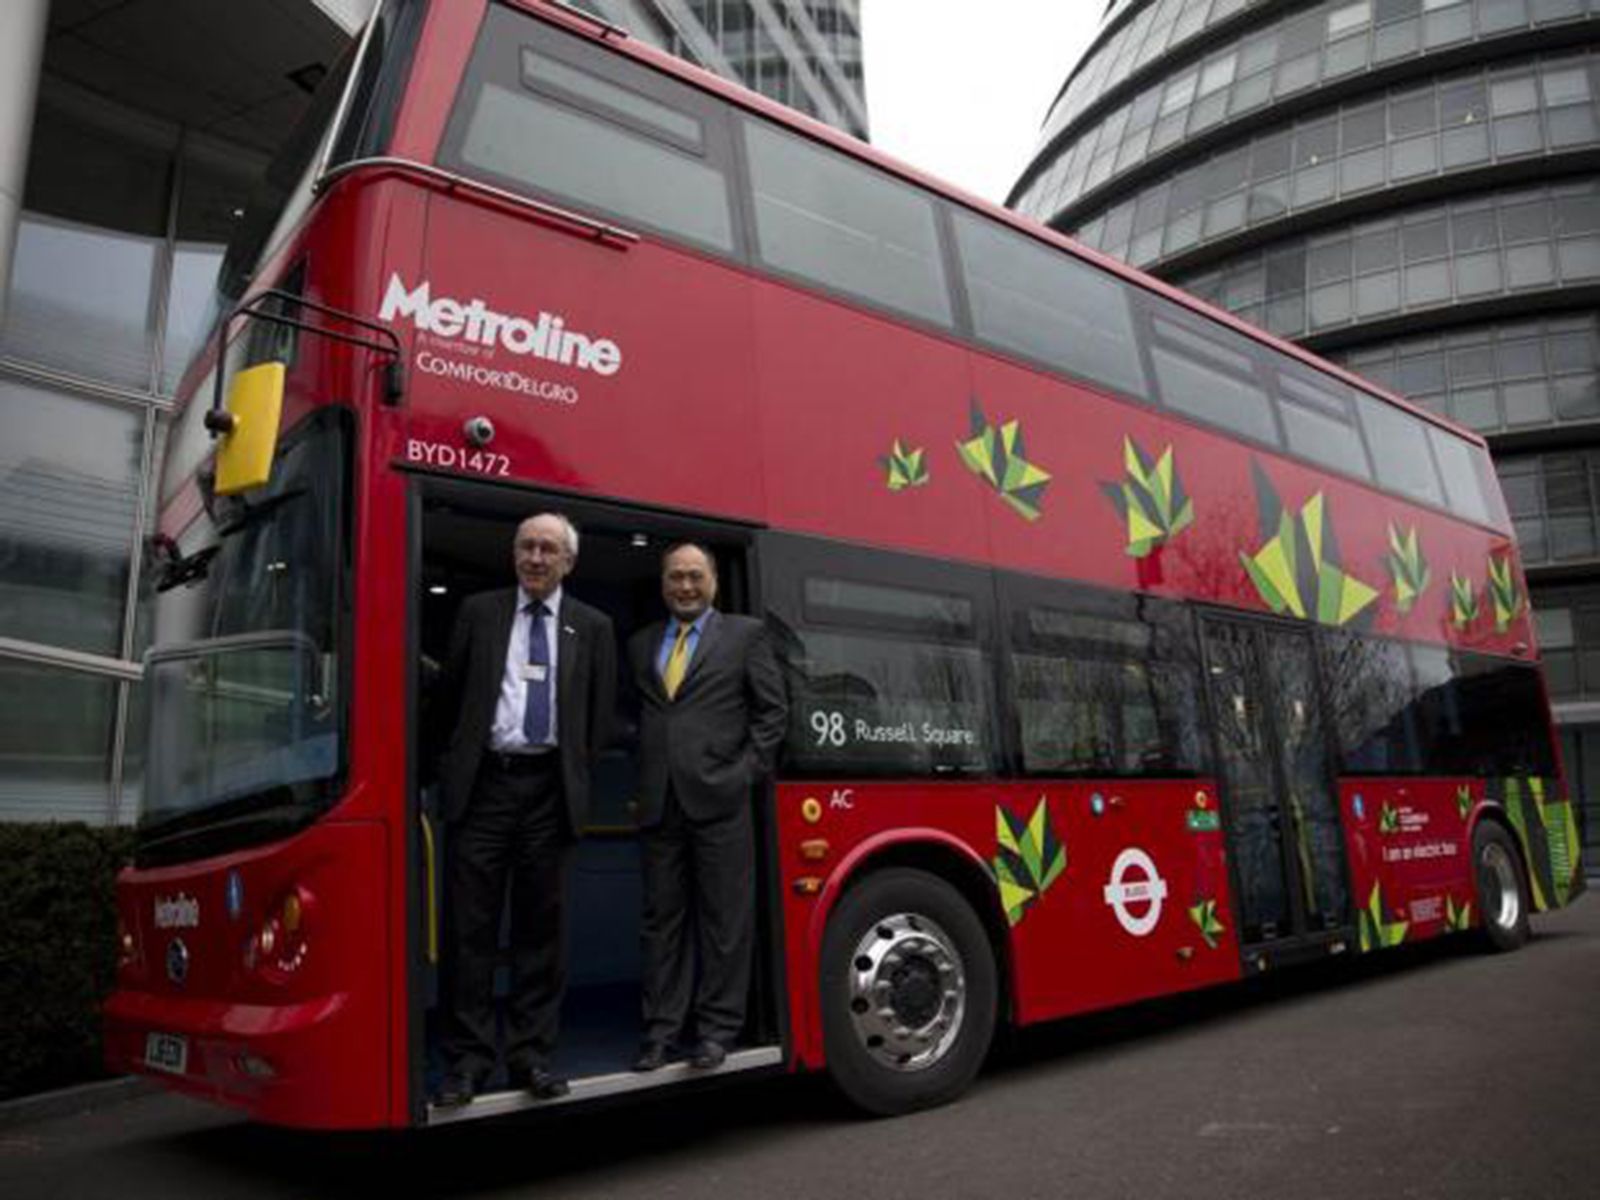 electric double decker buses with 180 mile range hit london next month image 2